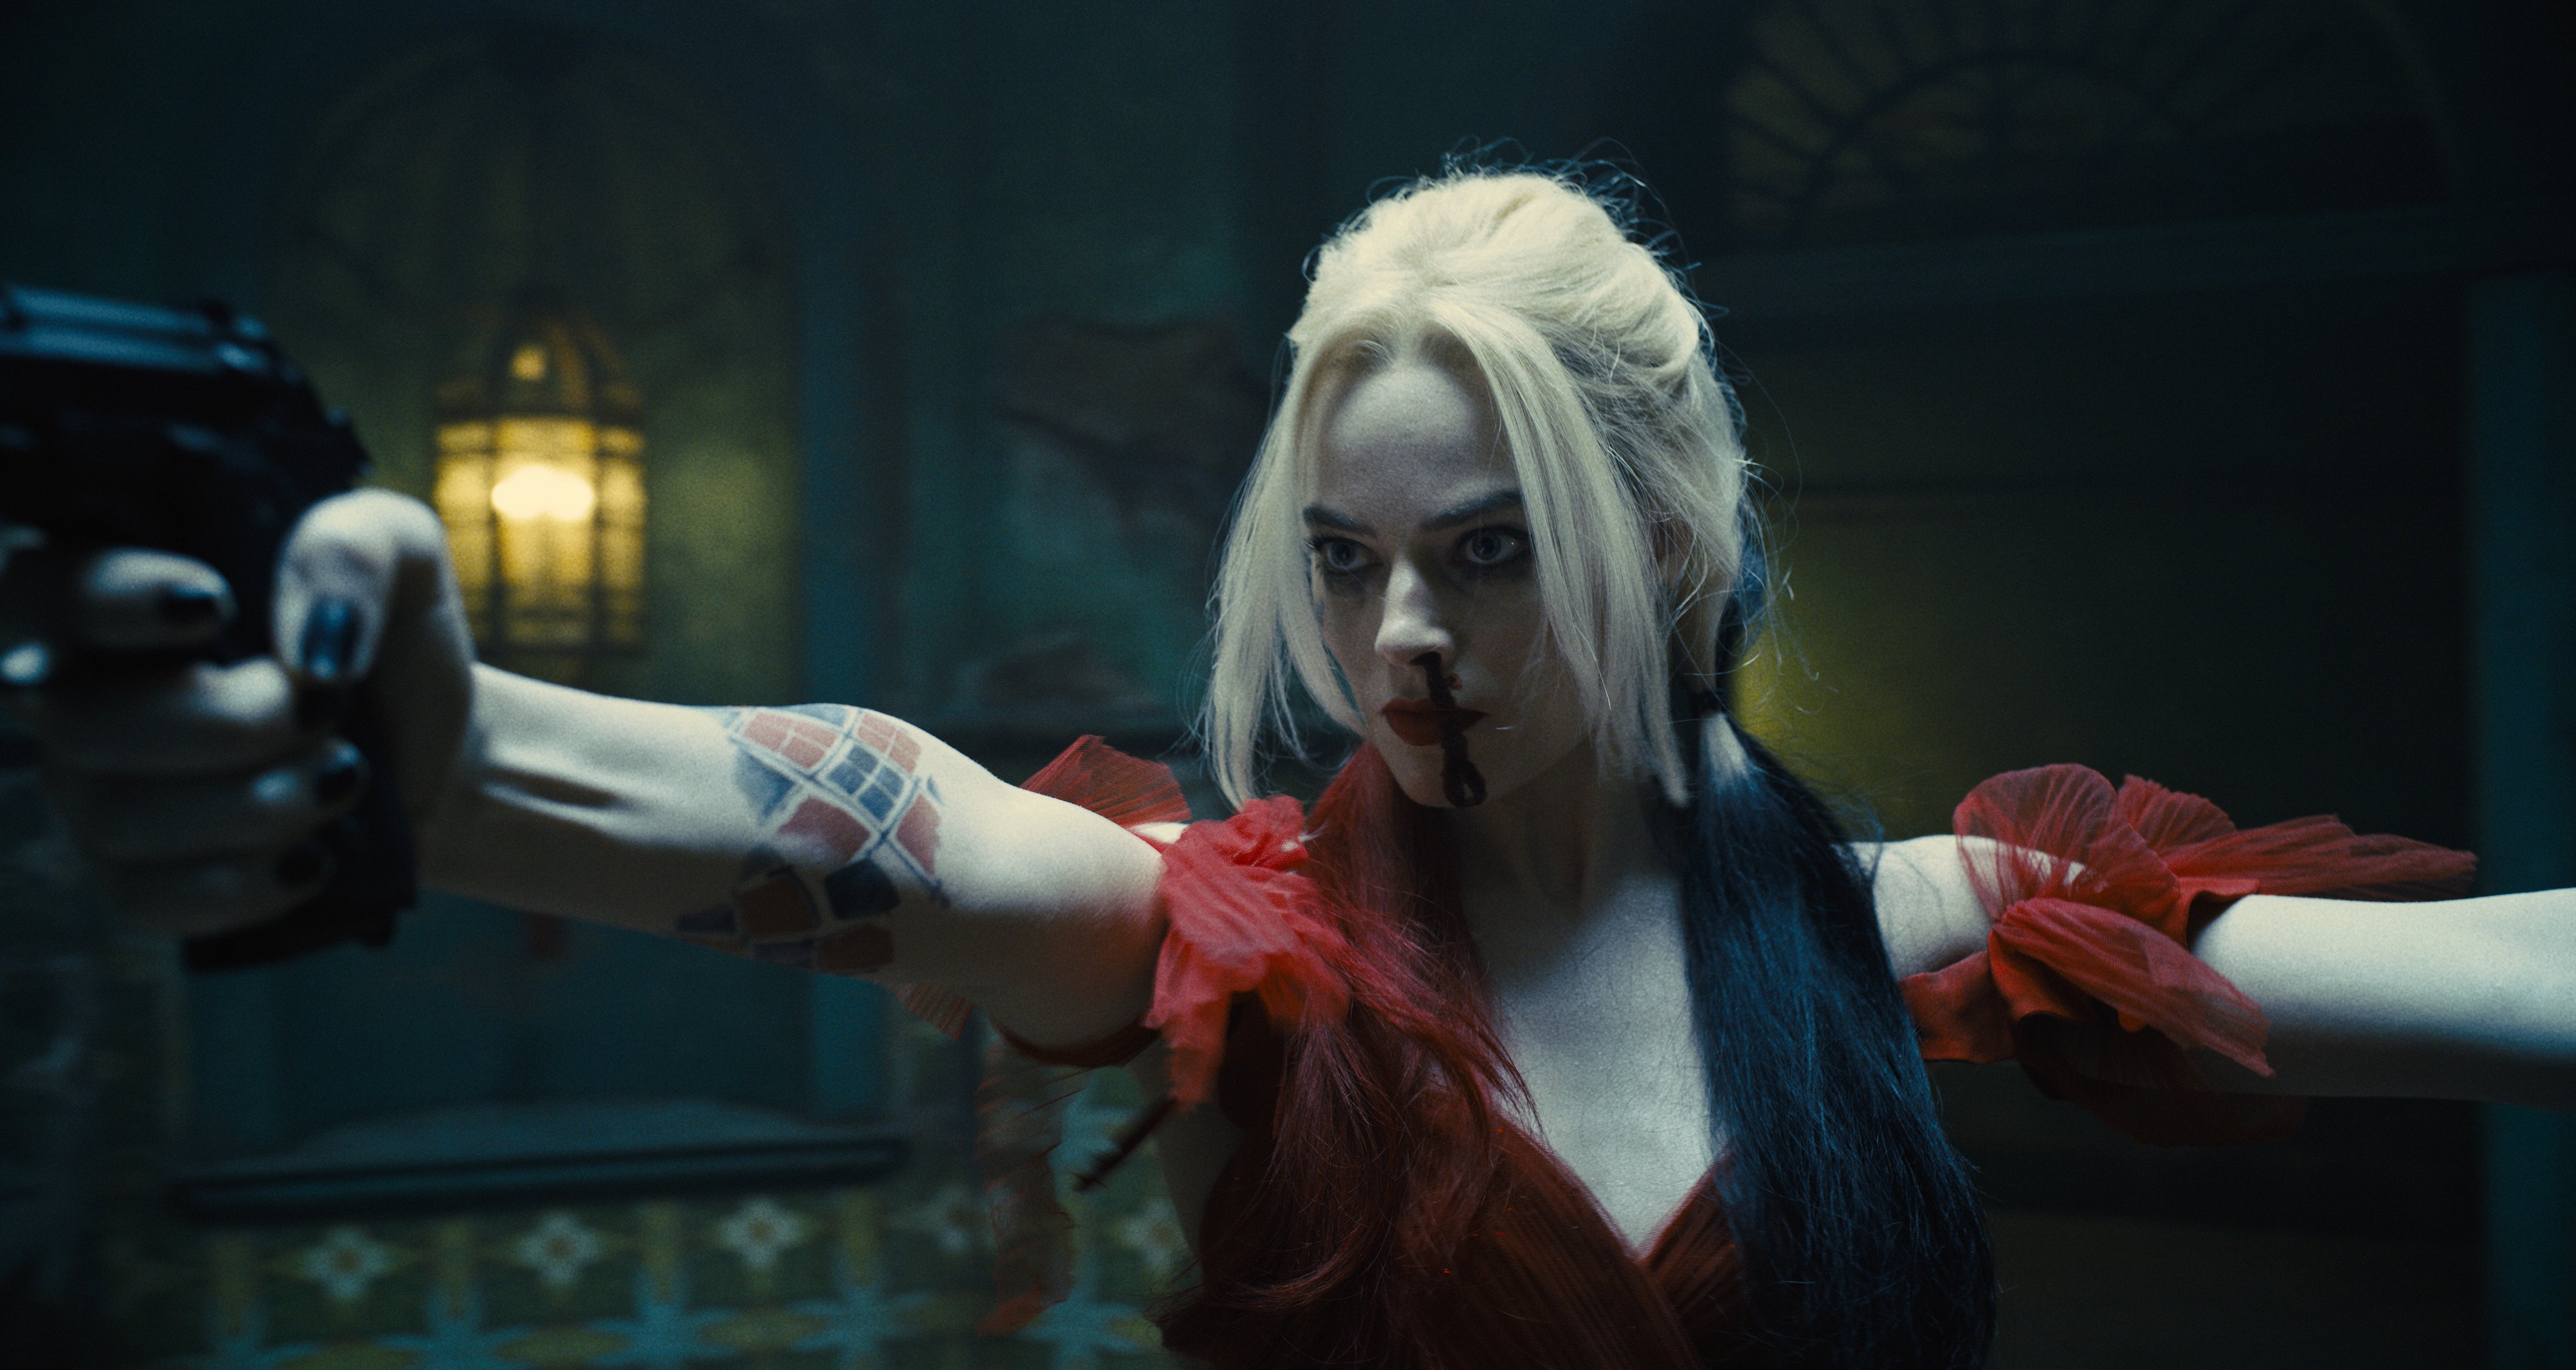 The Suicide Squad: Harley Quinn draws two guns